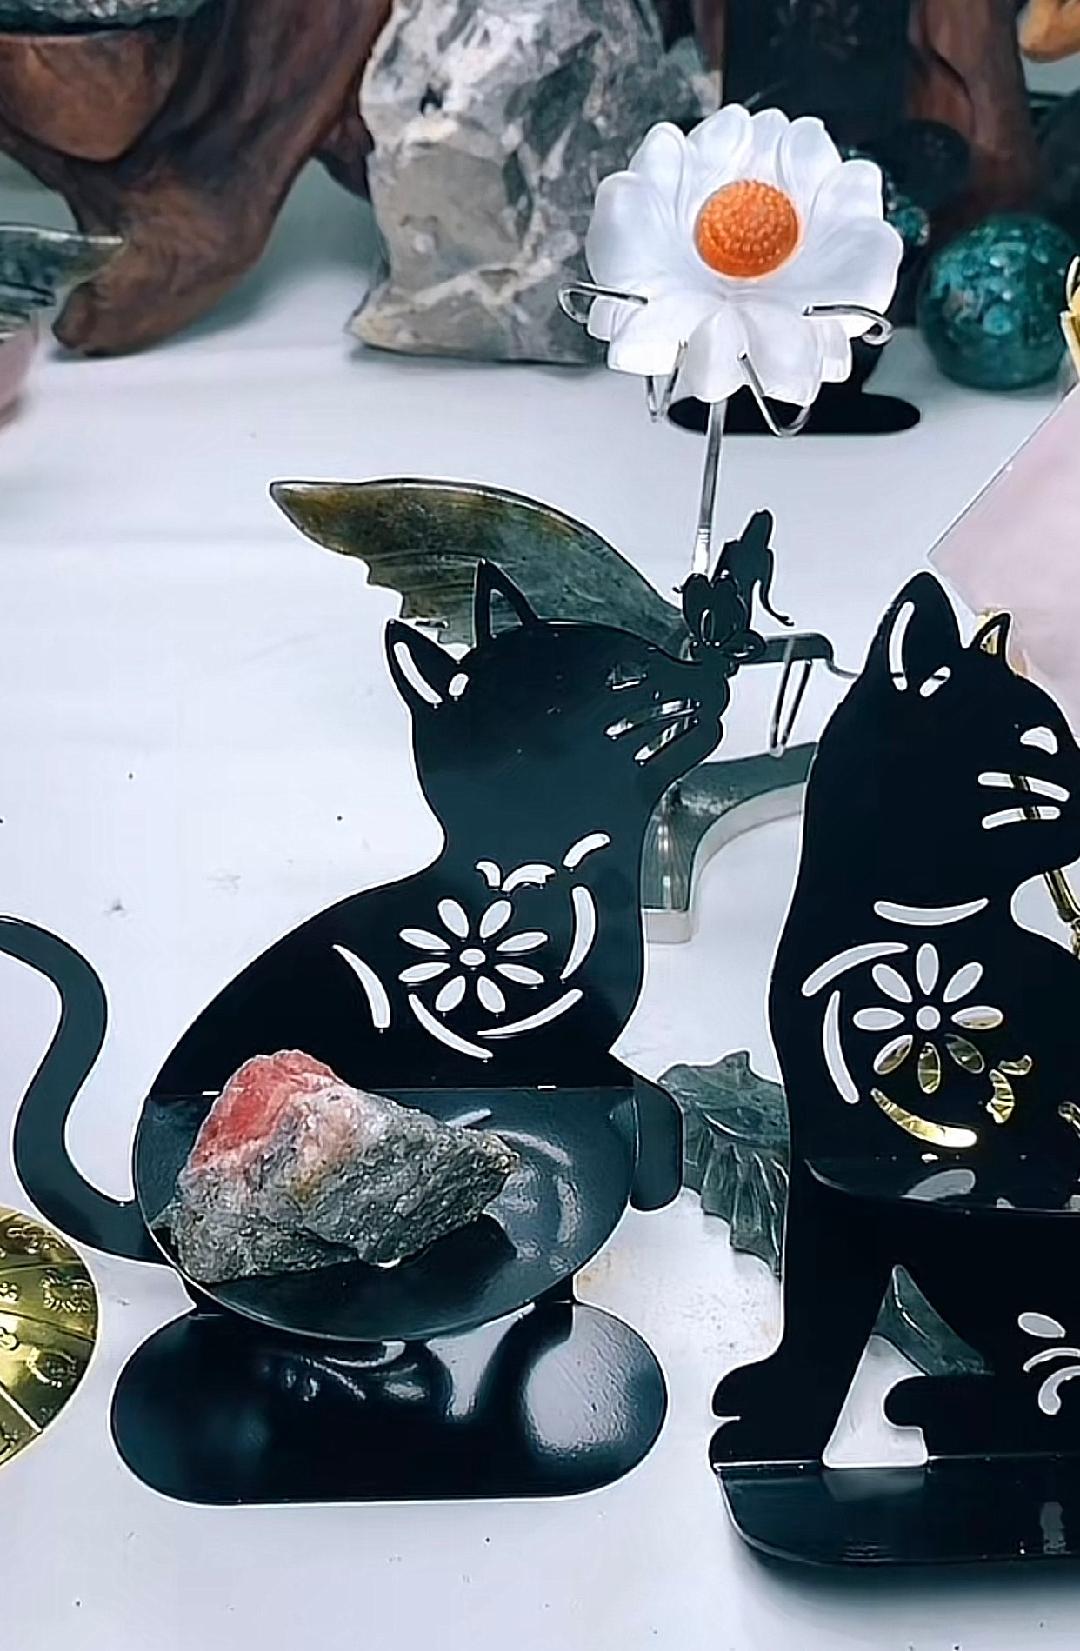 Black Metal Sphere Holder with shelf Butterfly, Cat, Hamsa Hand, and Owl Black metal Sphere Stand Display your beautiful Spheres with these unique Metal sphere stands, stunning Display Stands